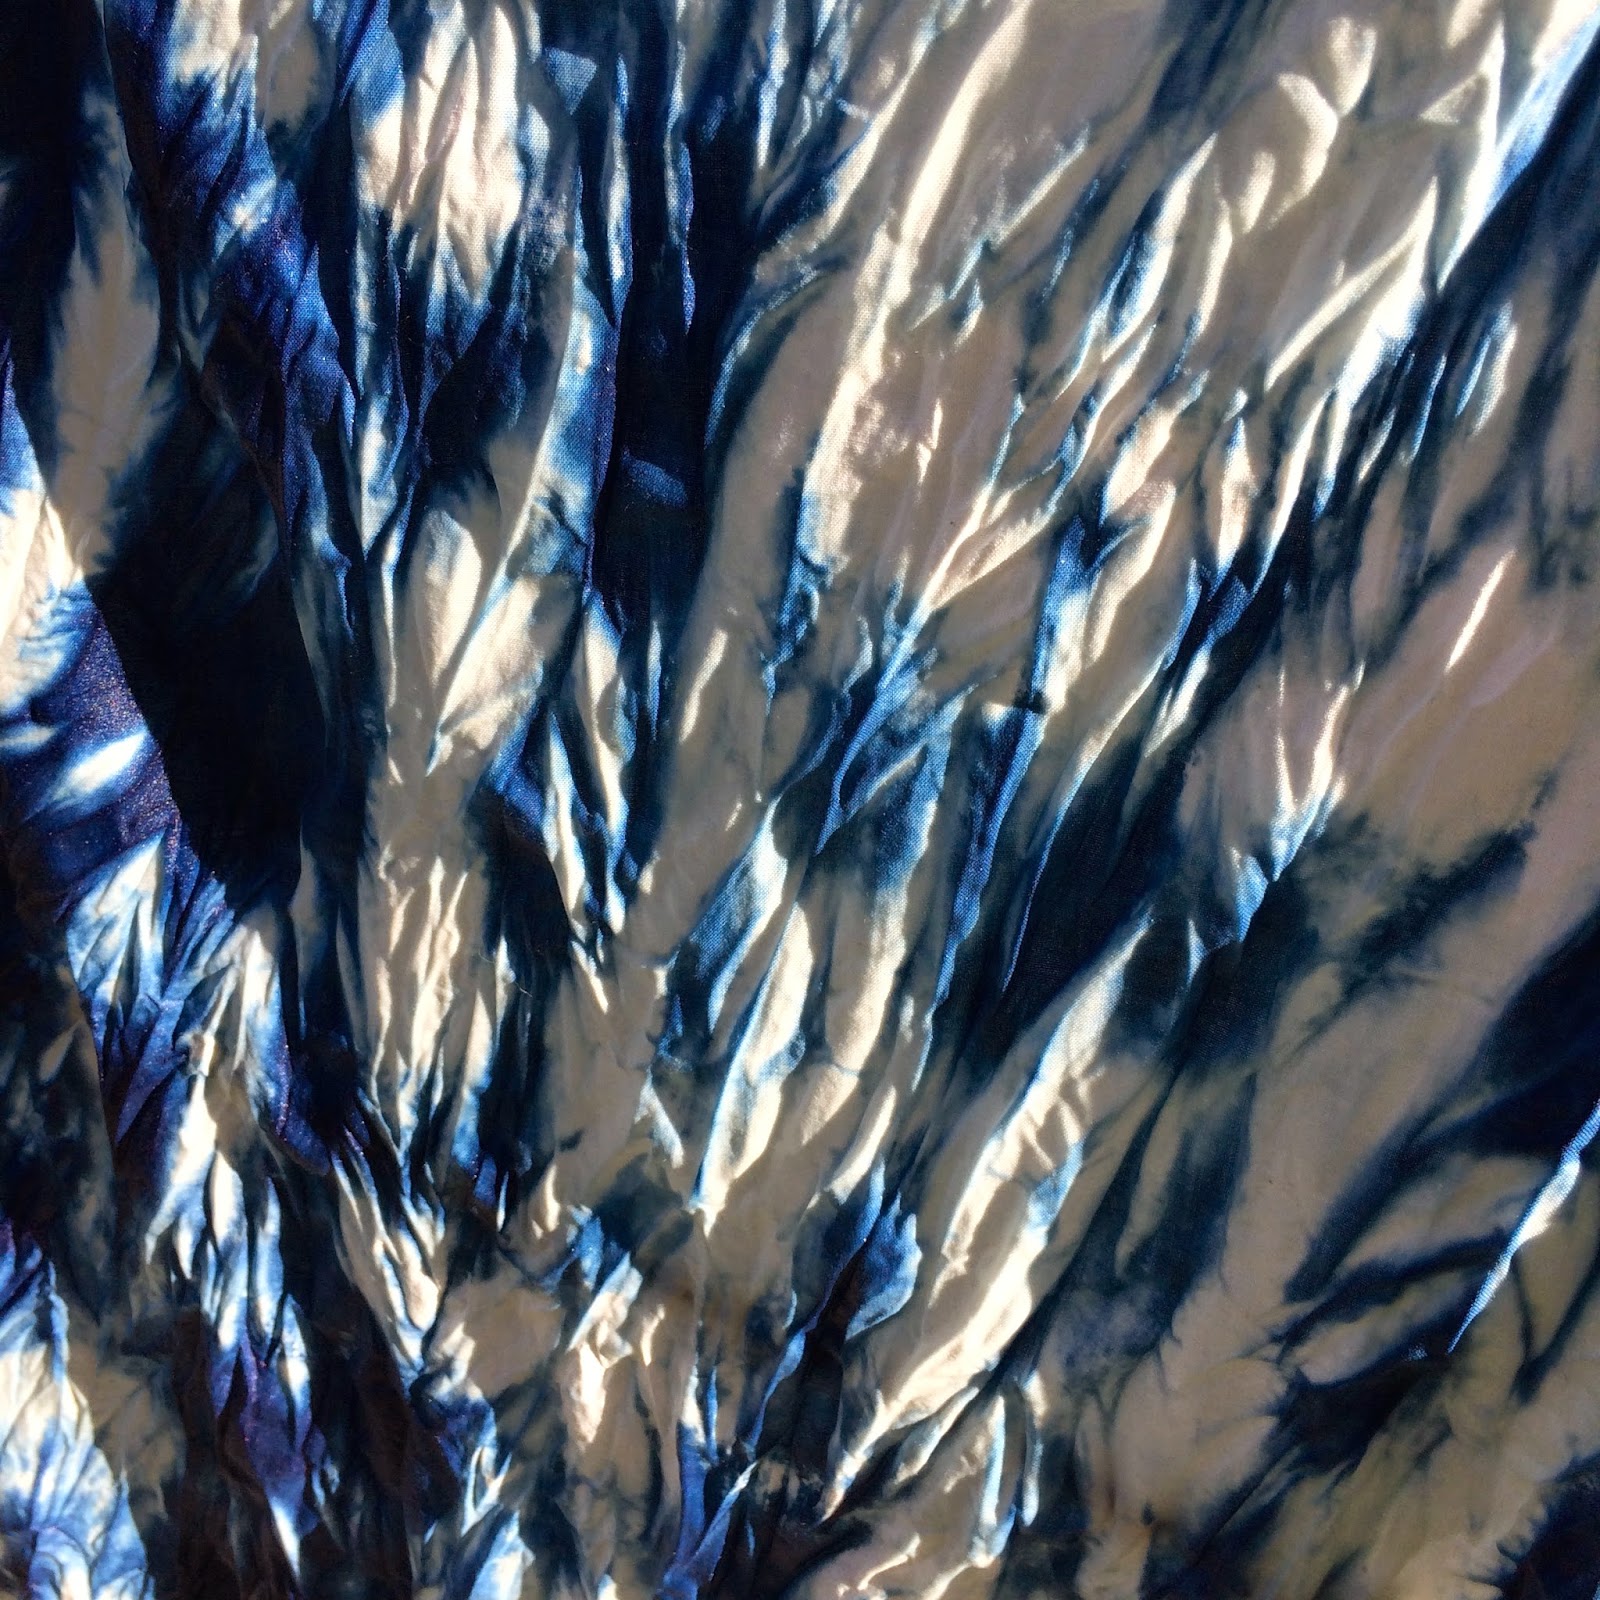 ScrappyCarp: Shibori Indigo Dying an obsession with history and tradition.